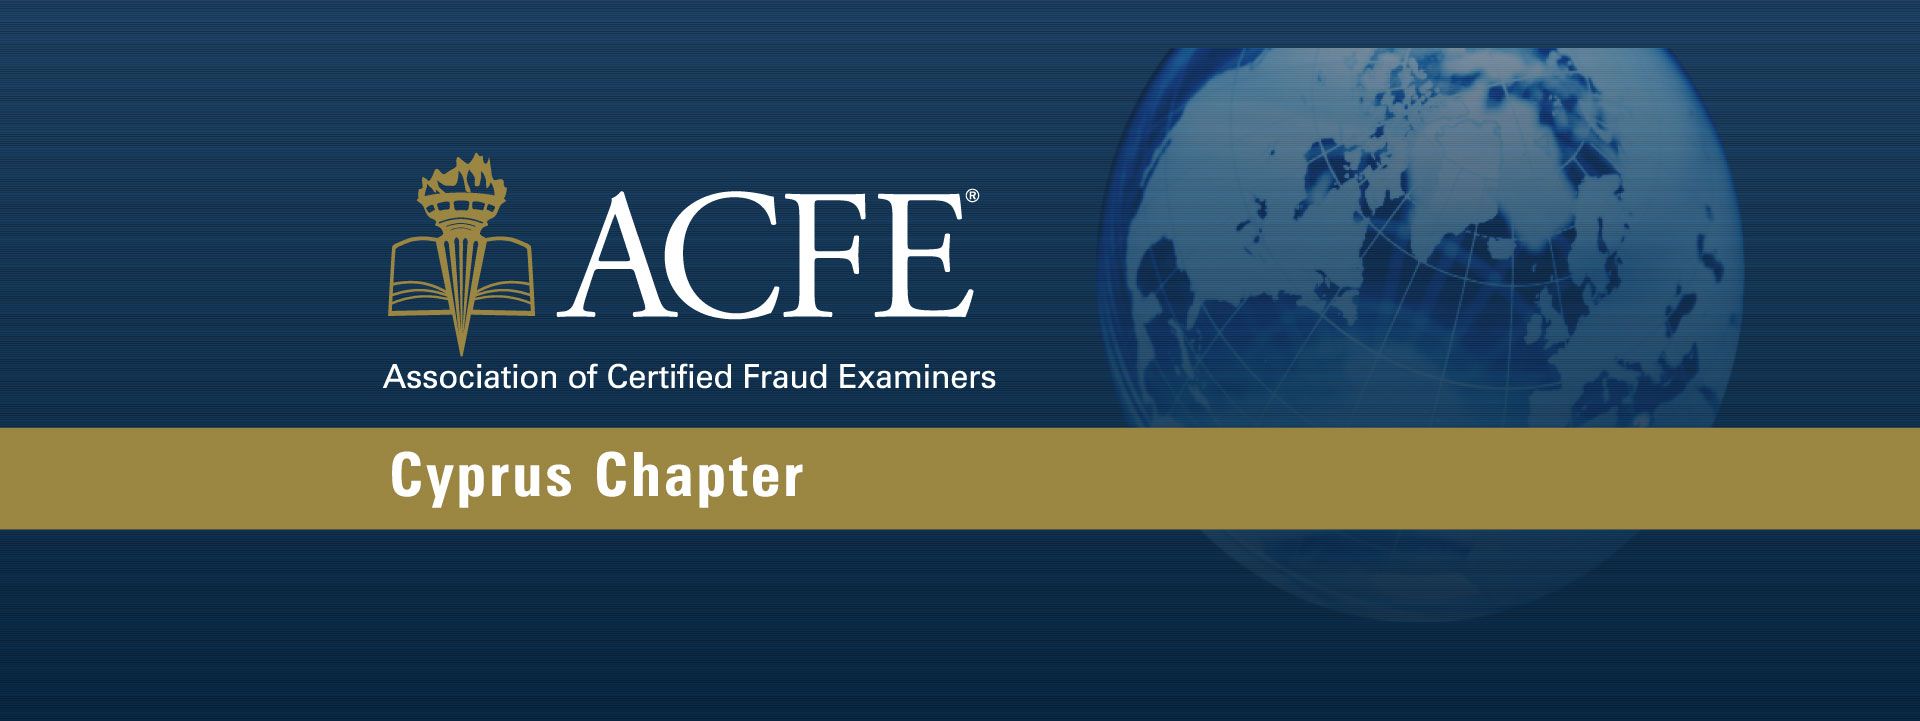 acfe cyprus chapter